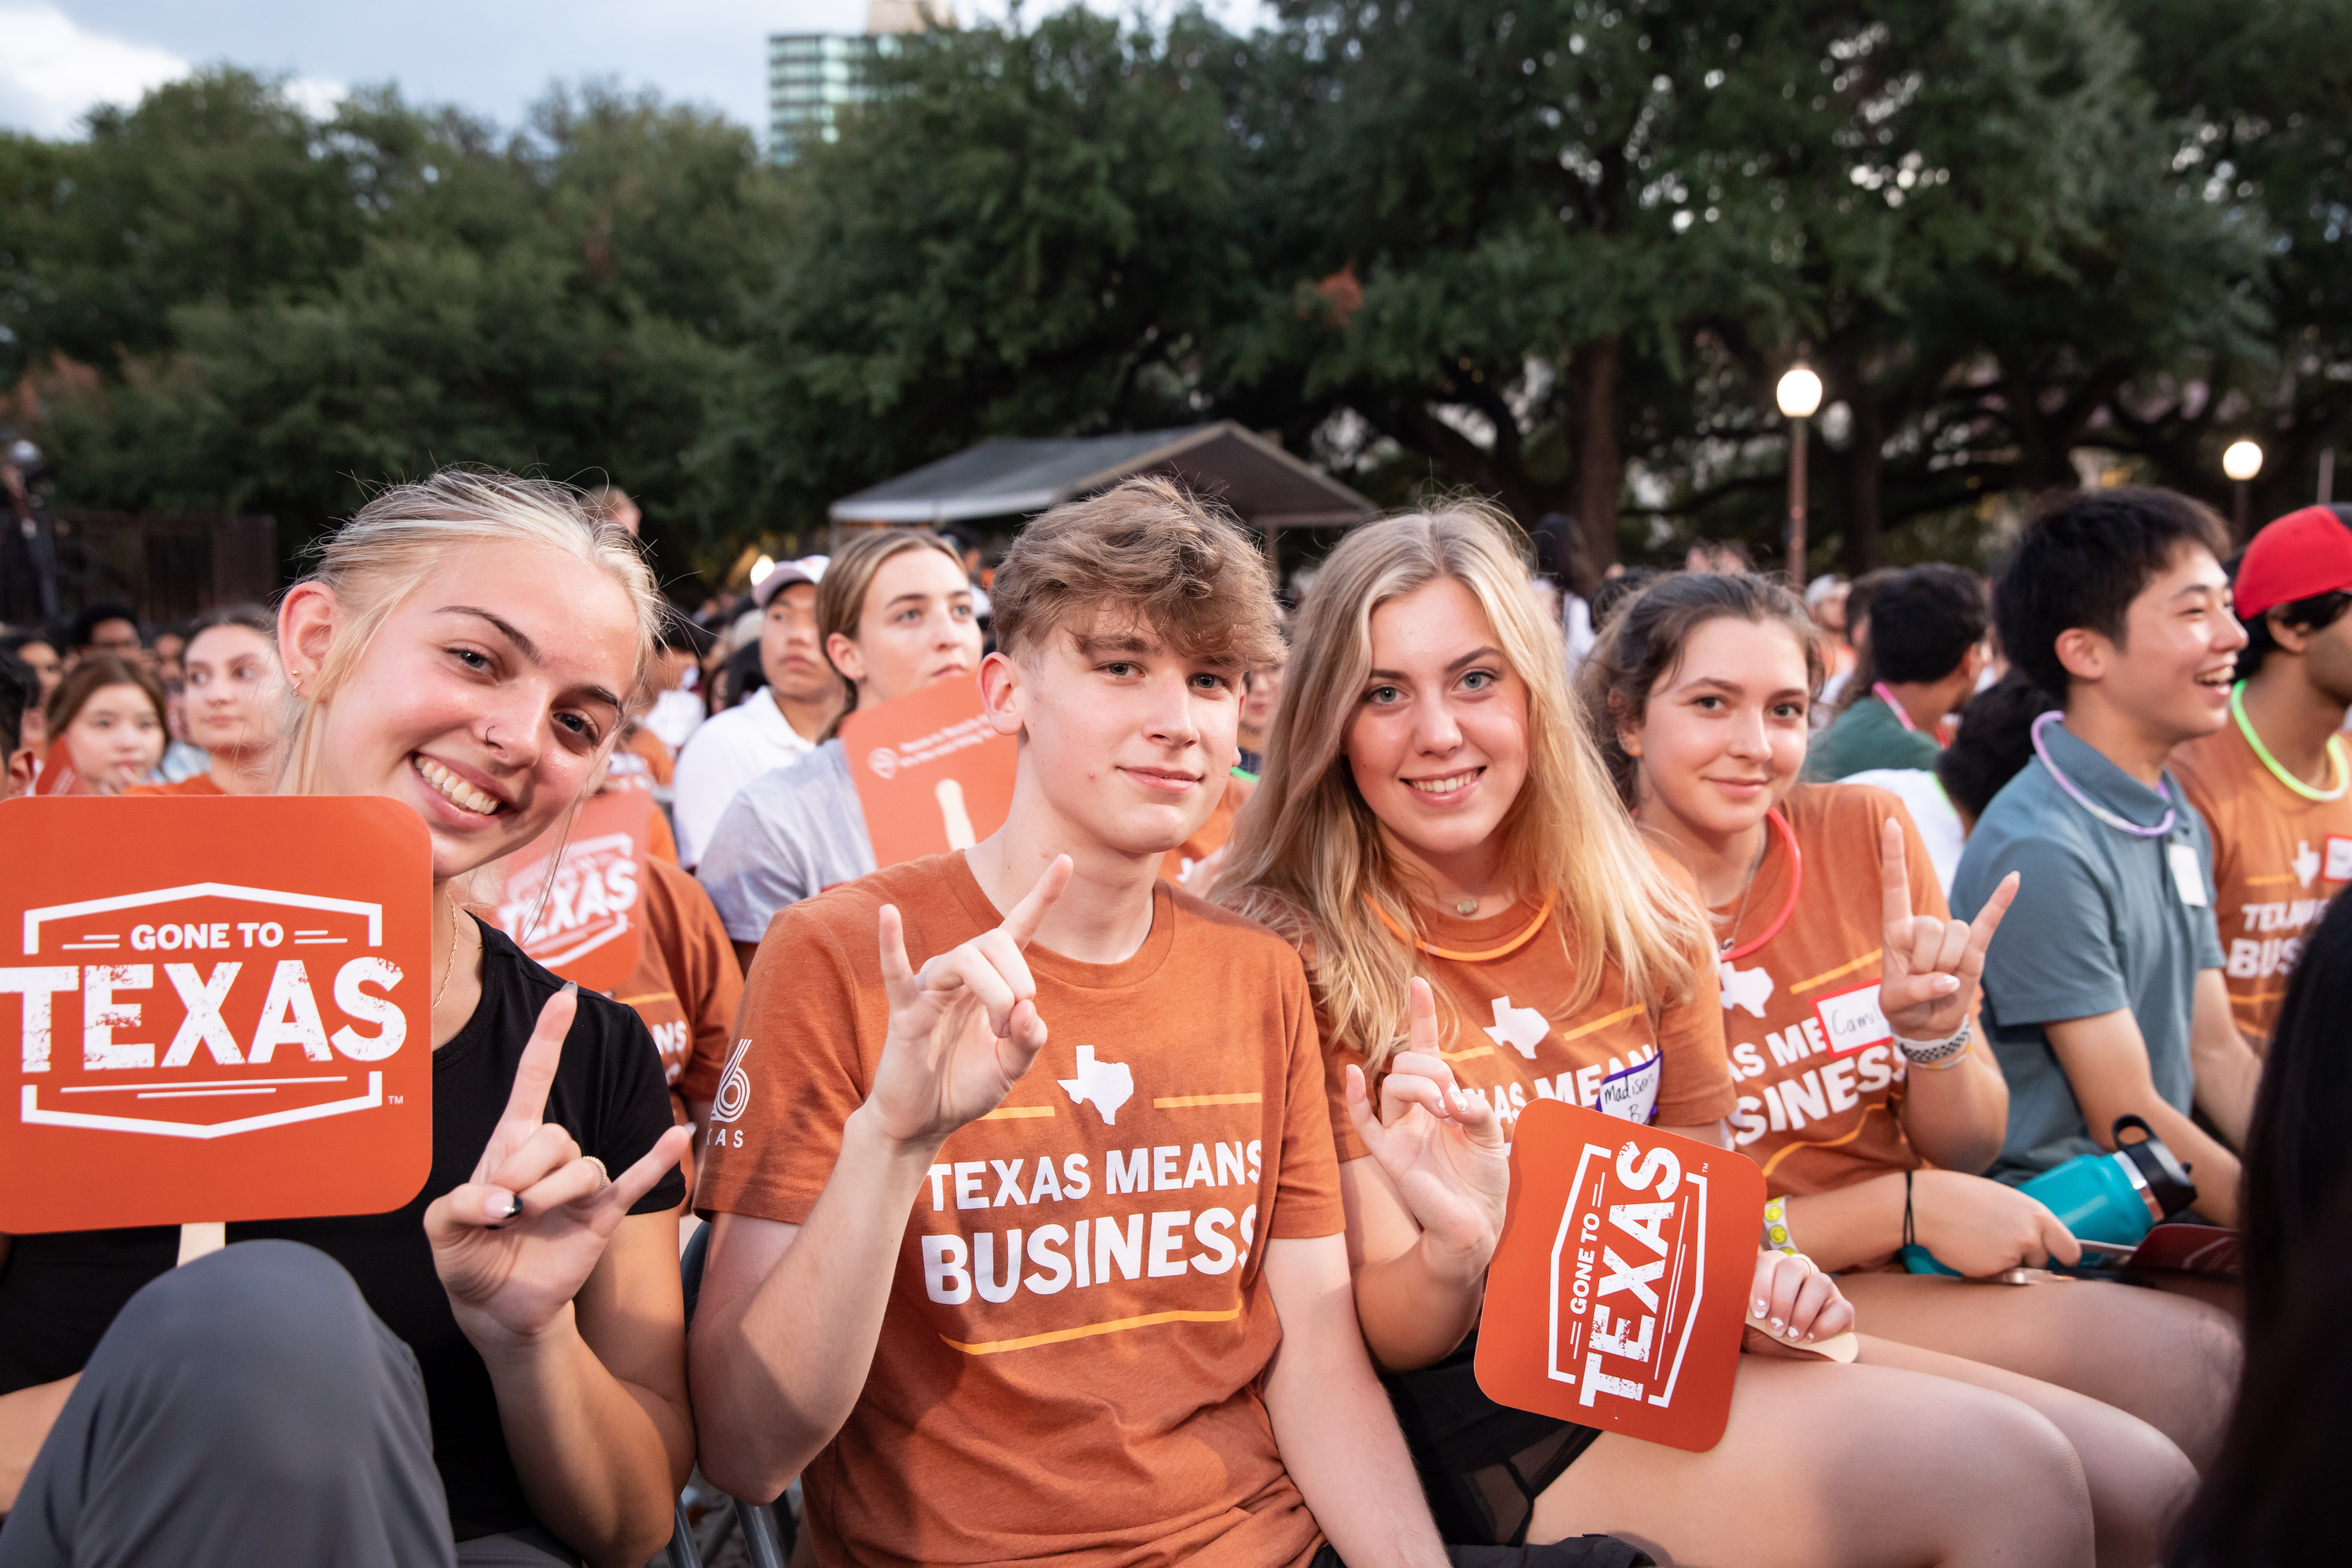 Students in orange, Texas Means Business, shirts sitting together.